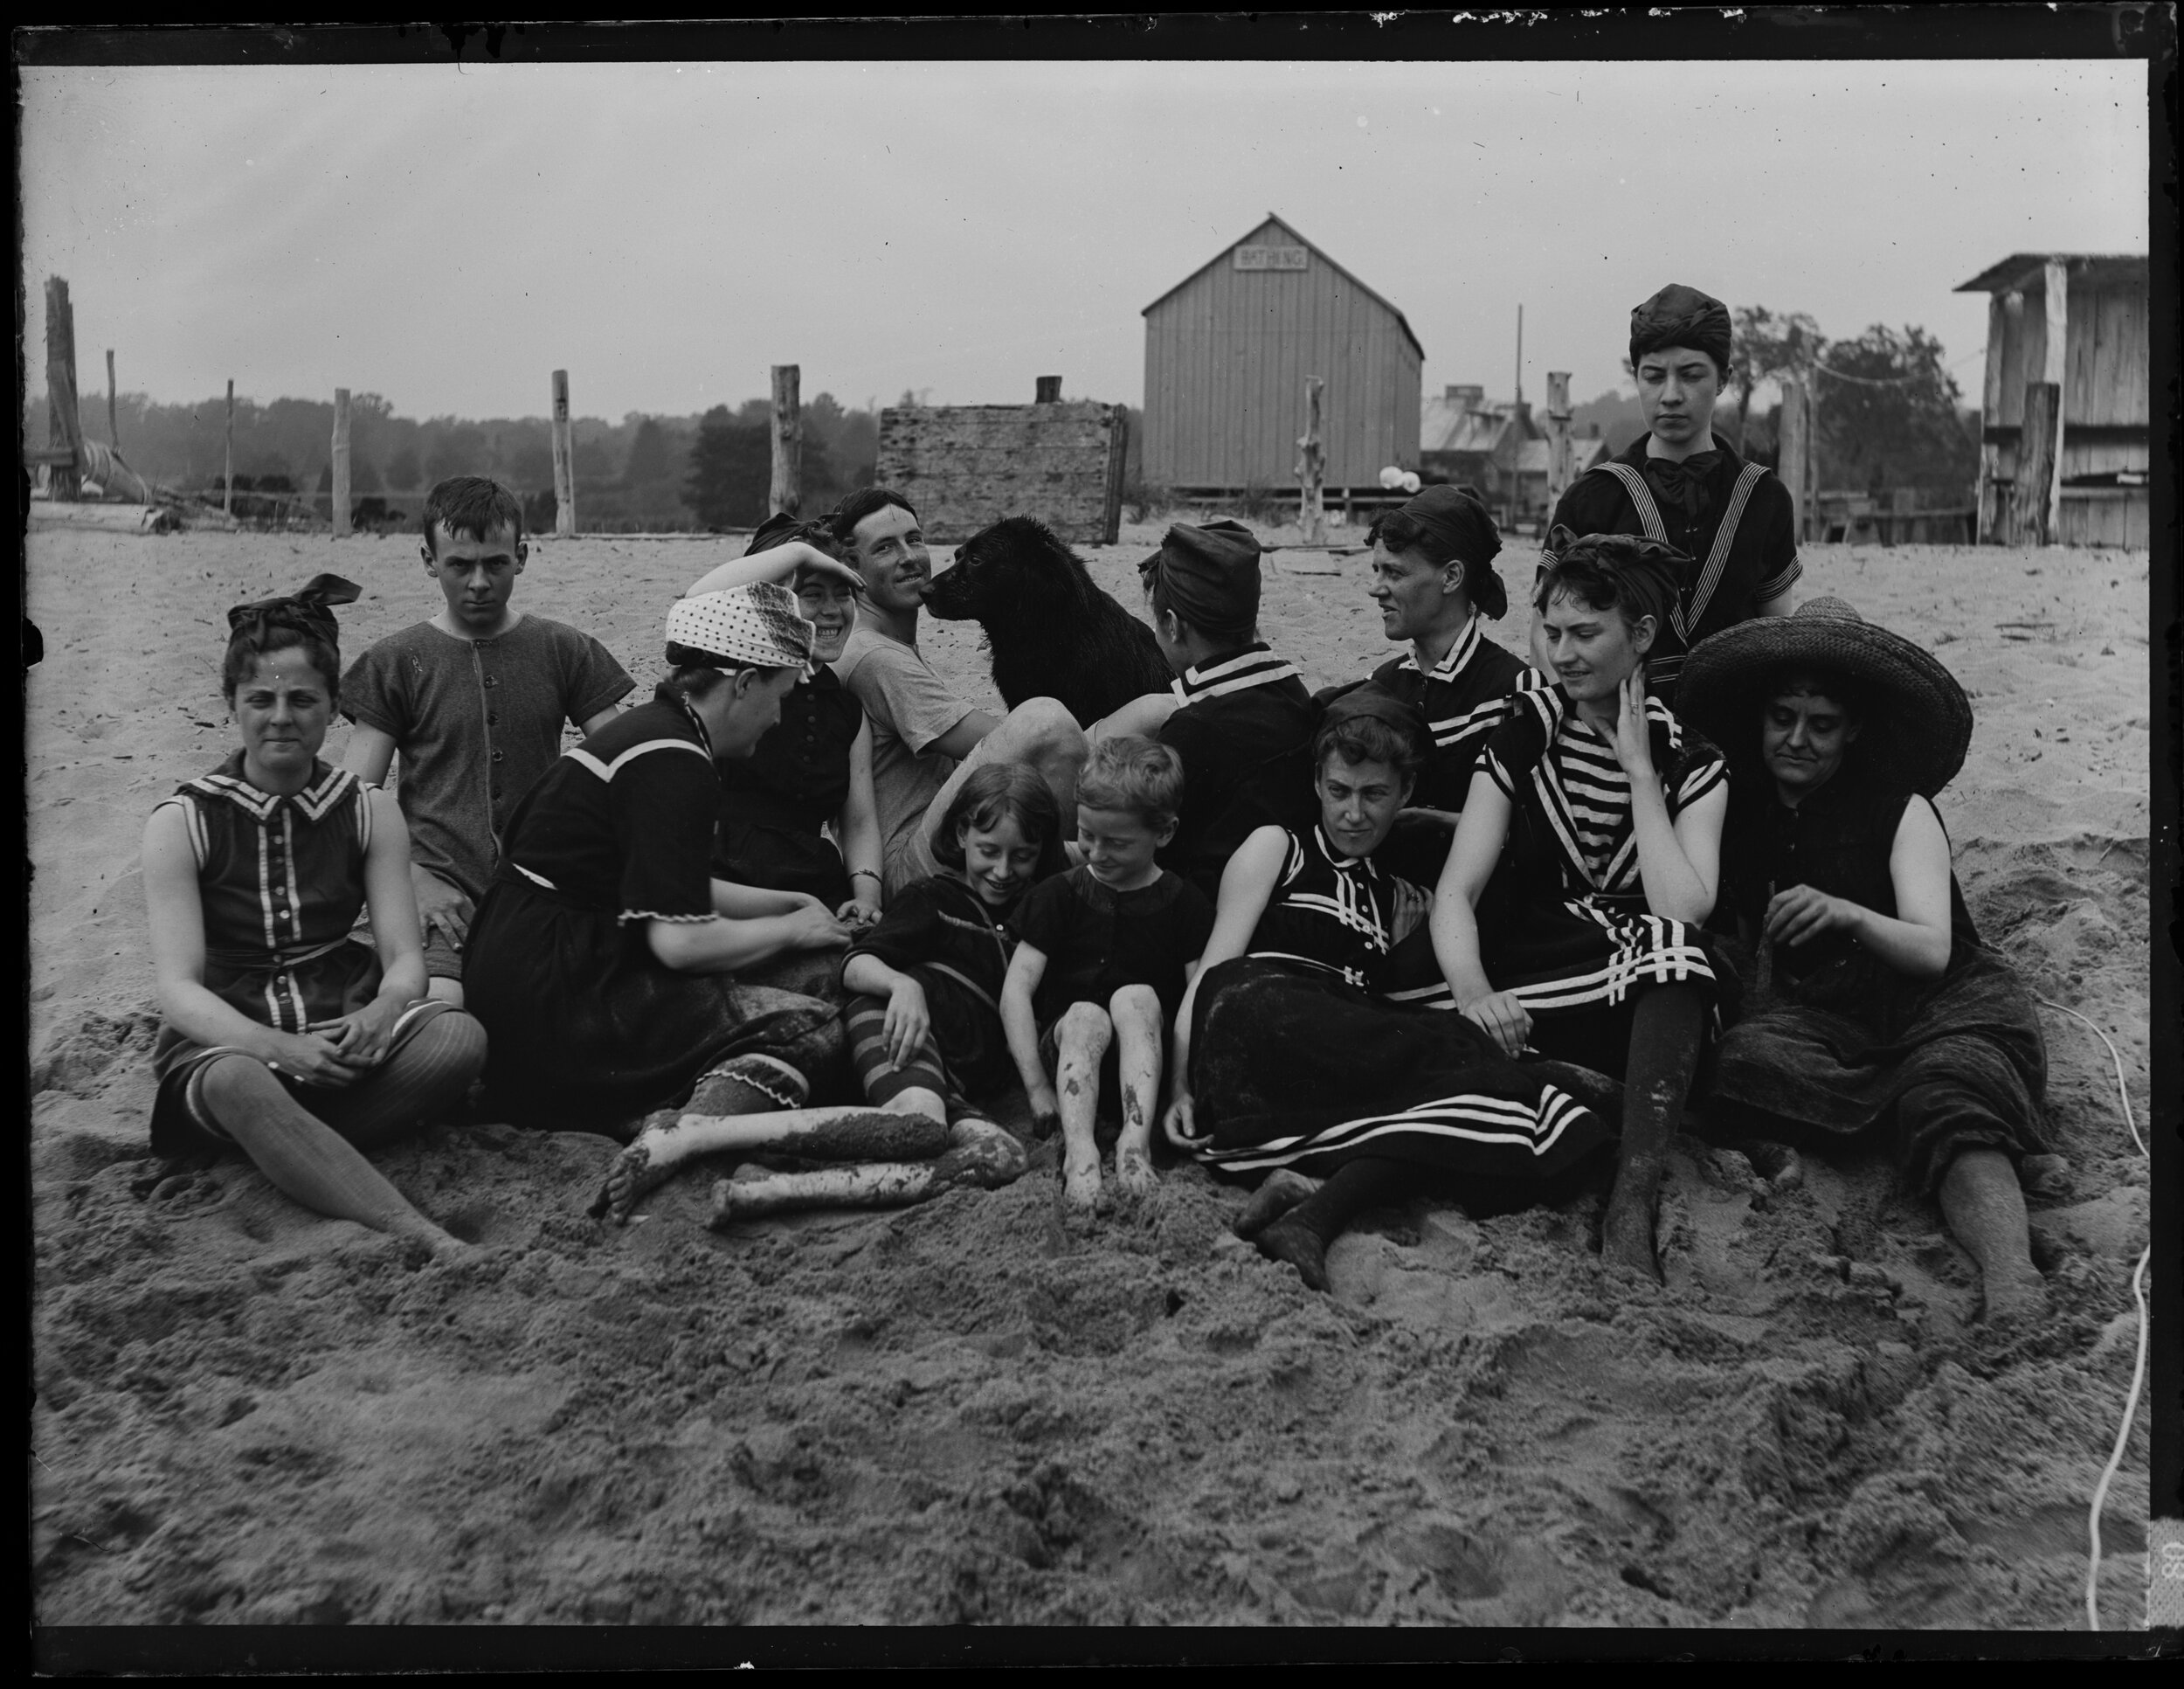  South Beach bathing party, Staten Island. Photo by Alice Austen, September 15, 1886. Alice Austen is in the back row at right. The cable that she used to release the shutter on her camera and take the picture is visible in the sand at right. 